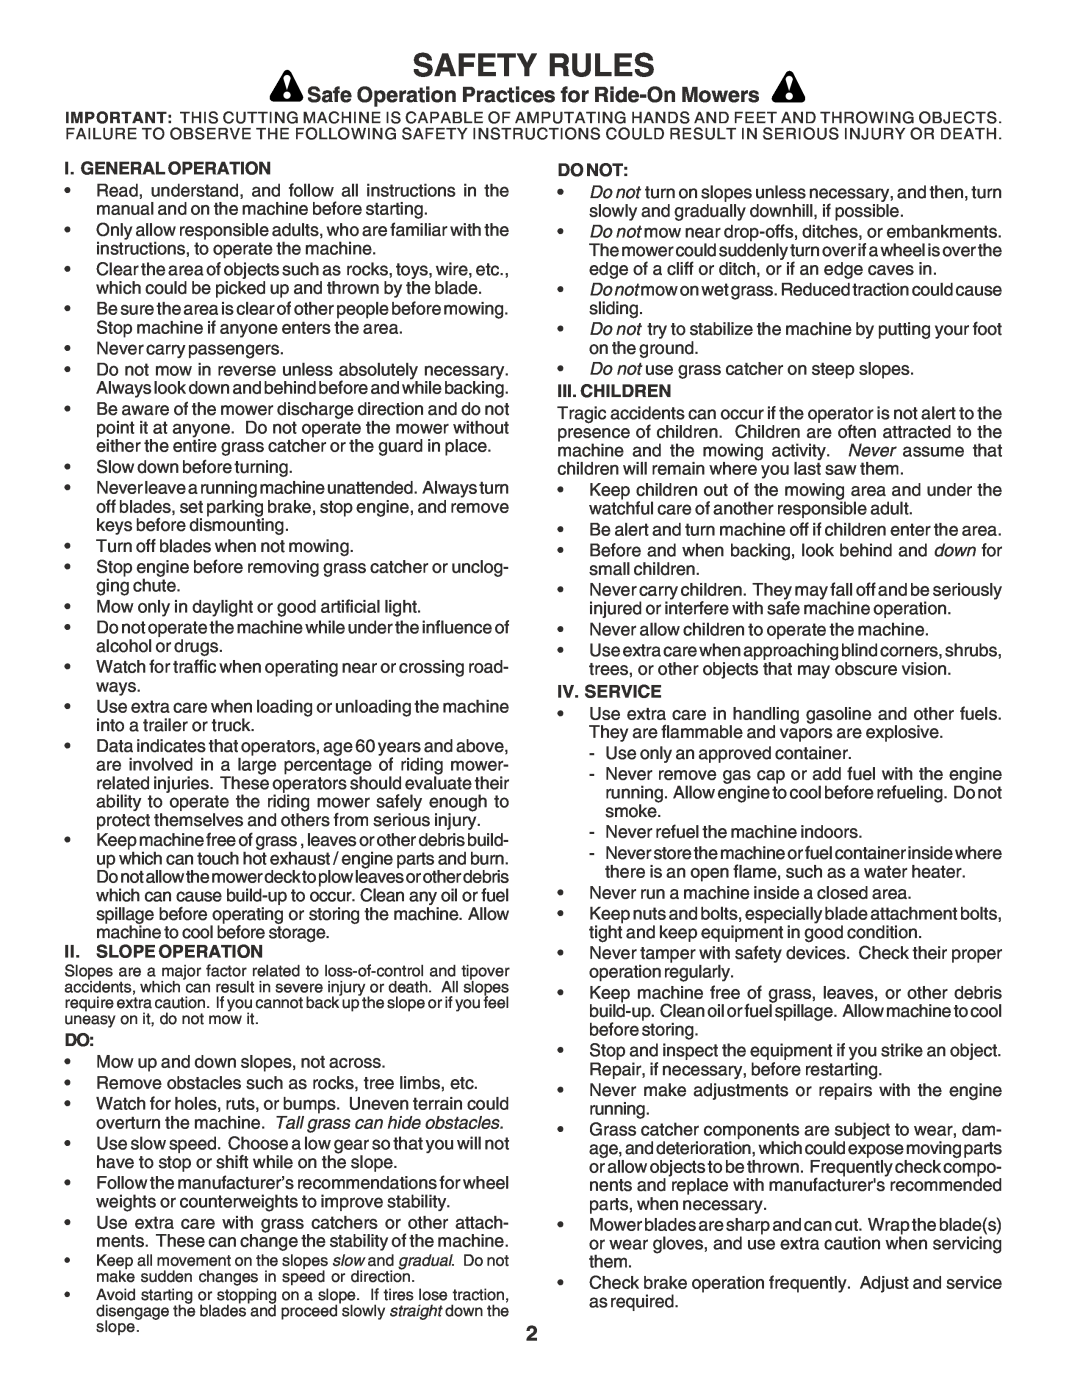 Poulan PR25PH48STC owner manual Safety Rules, Safe Operation Practices for Ride-On Mowers 